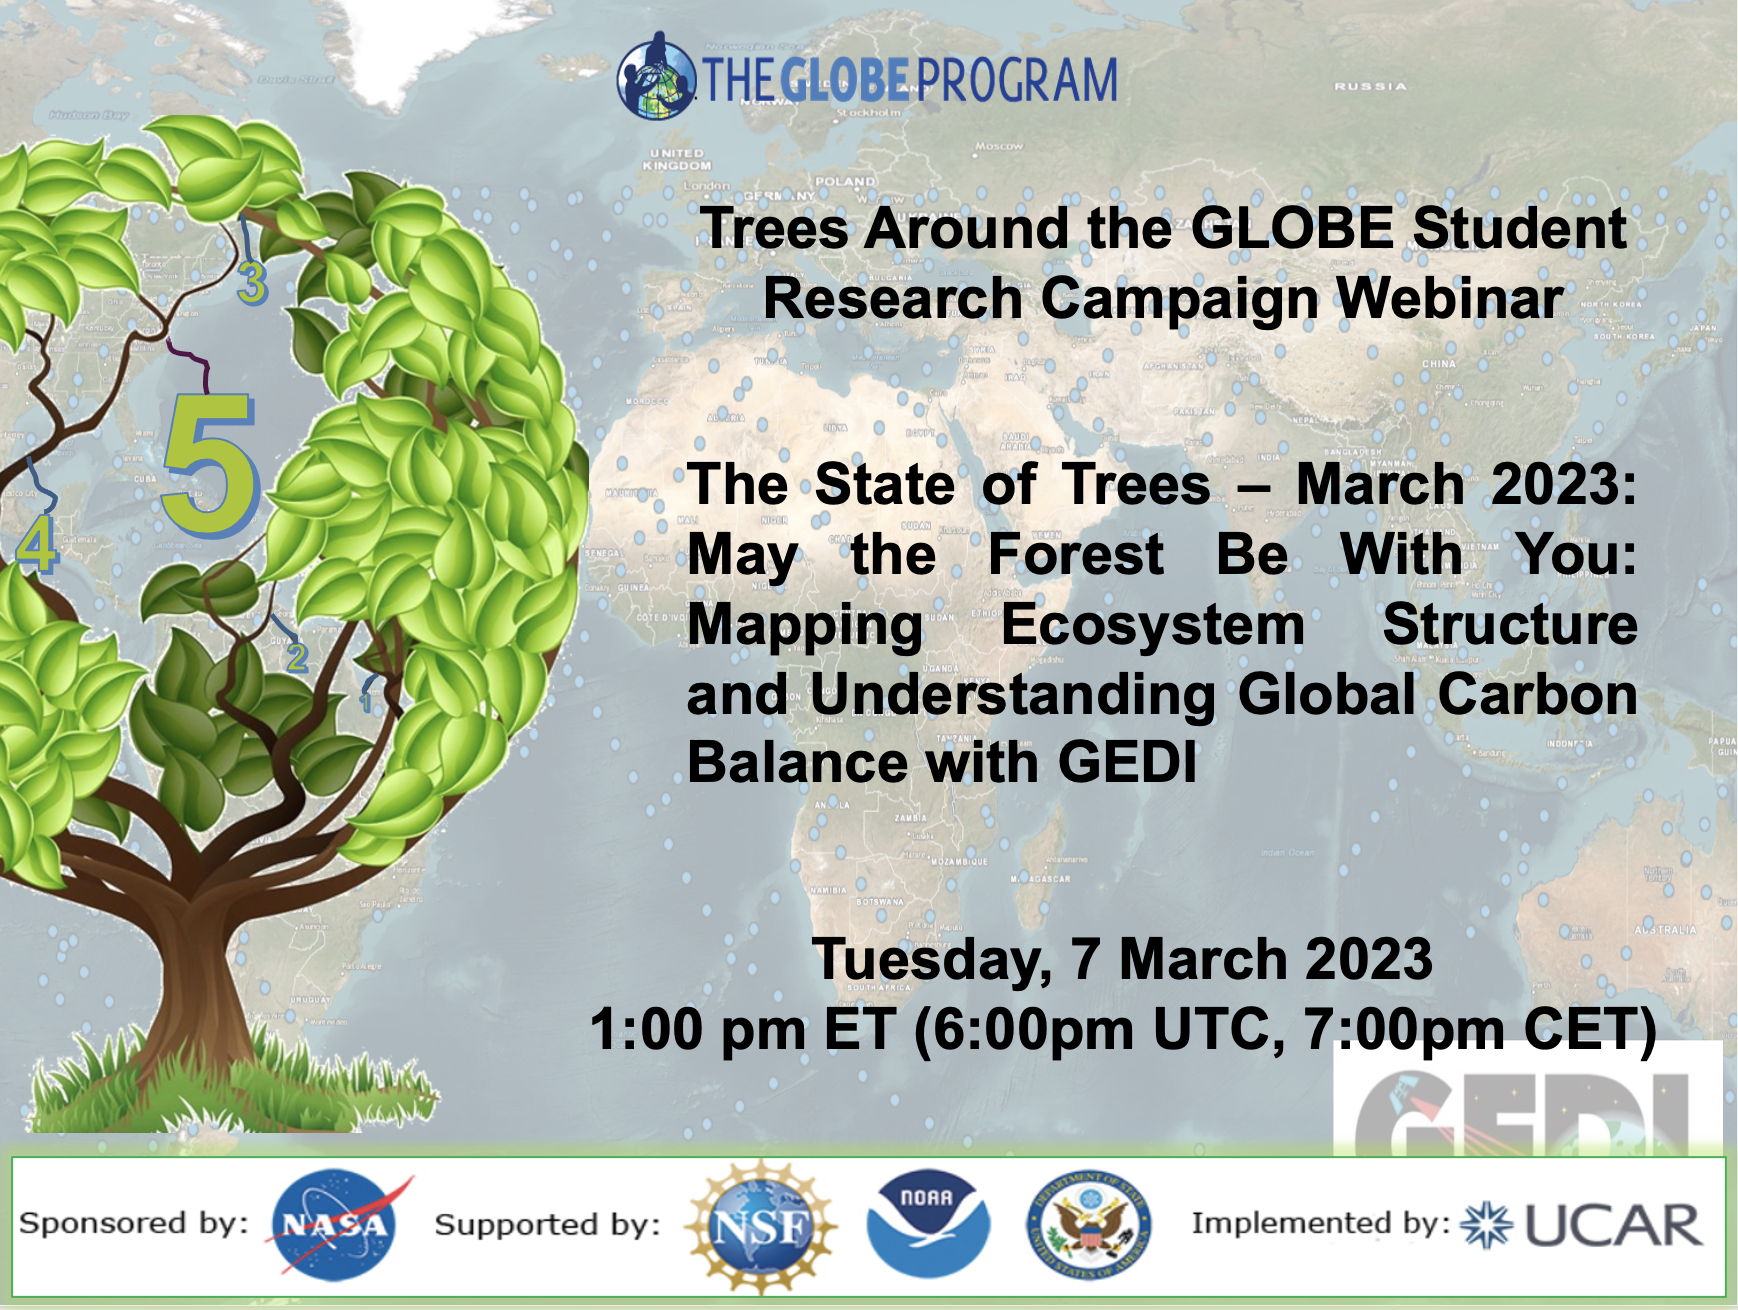 Trees Around the GLOBE 07 March webinar shareable showing the title and date of the event